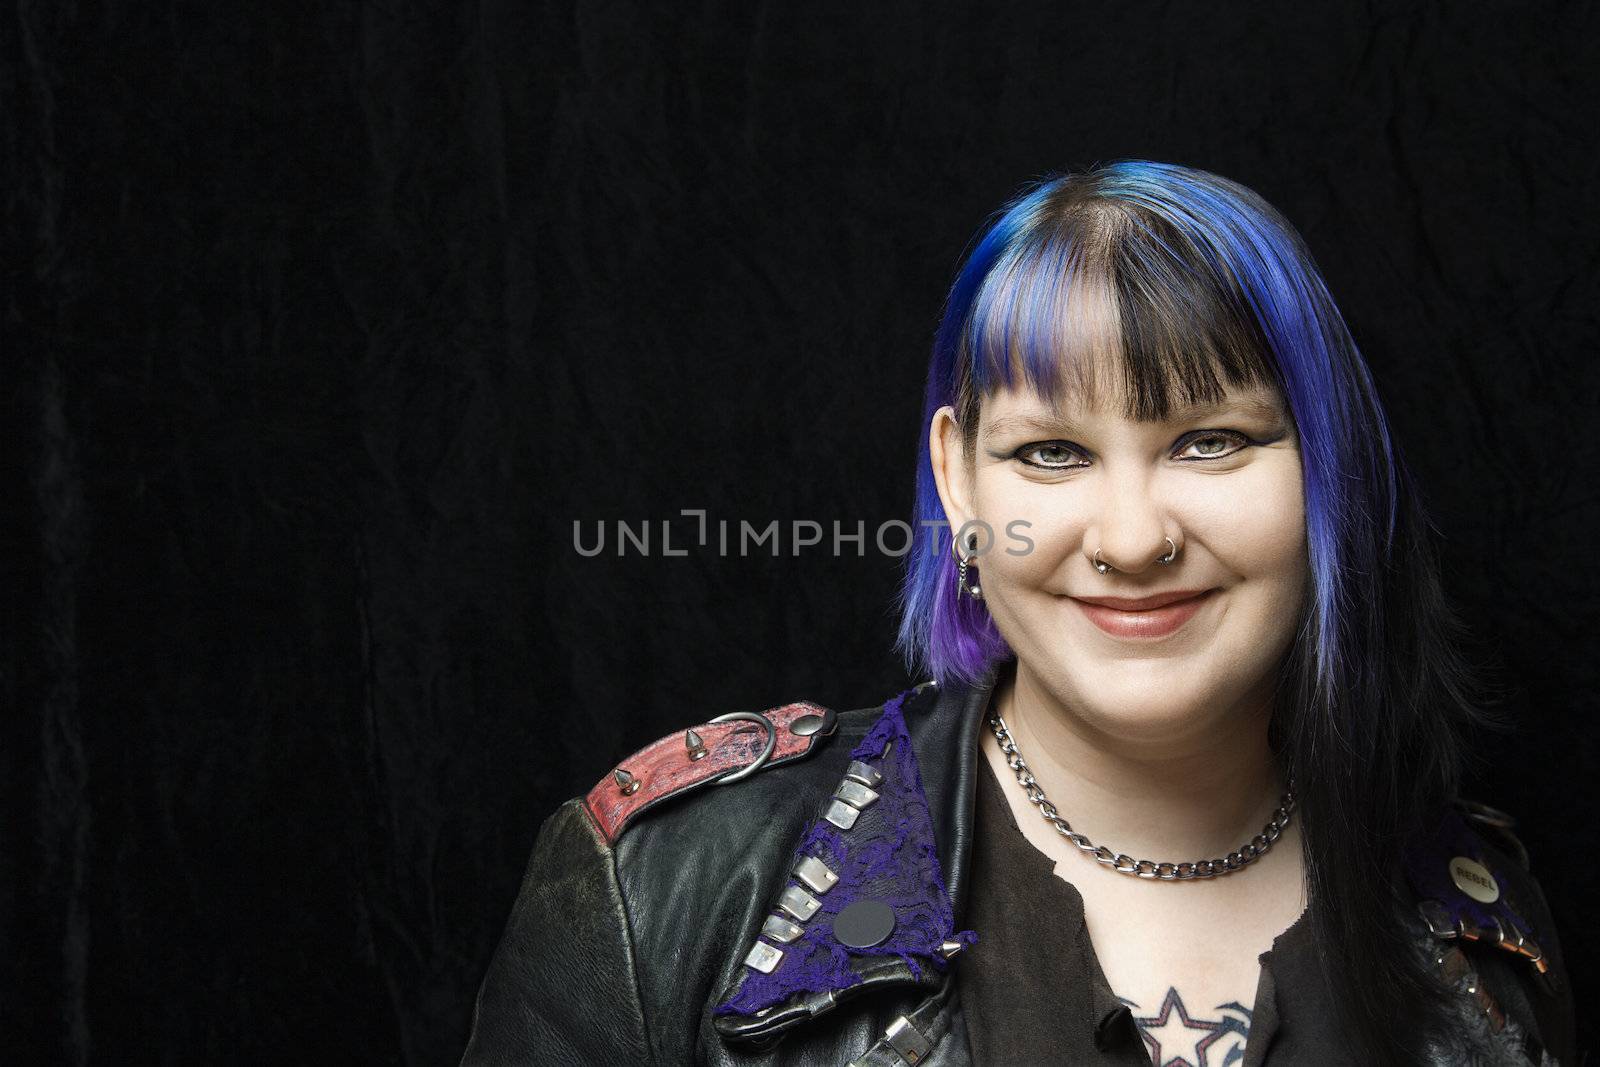 Portrait of smiling Caucasian woman with blue hair and black leather jacket against black background.